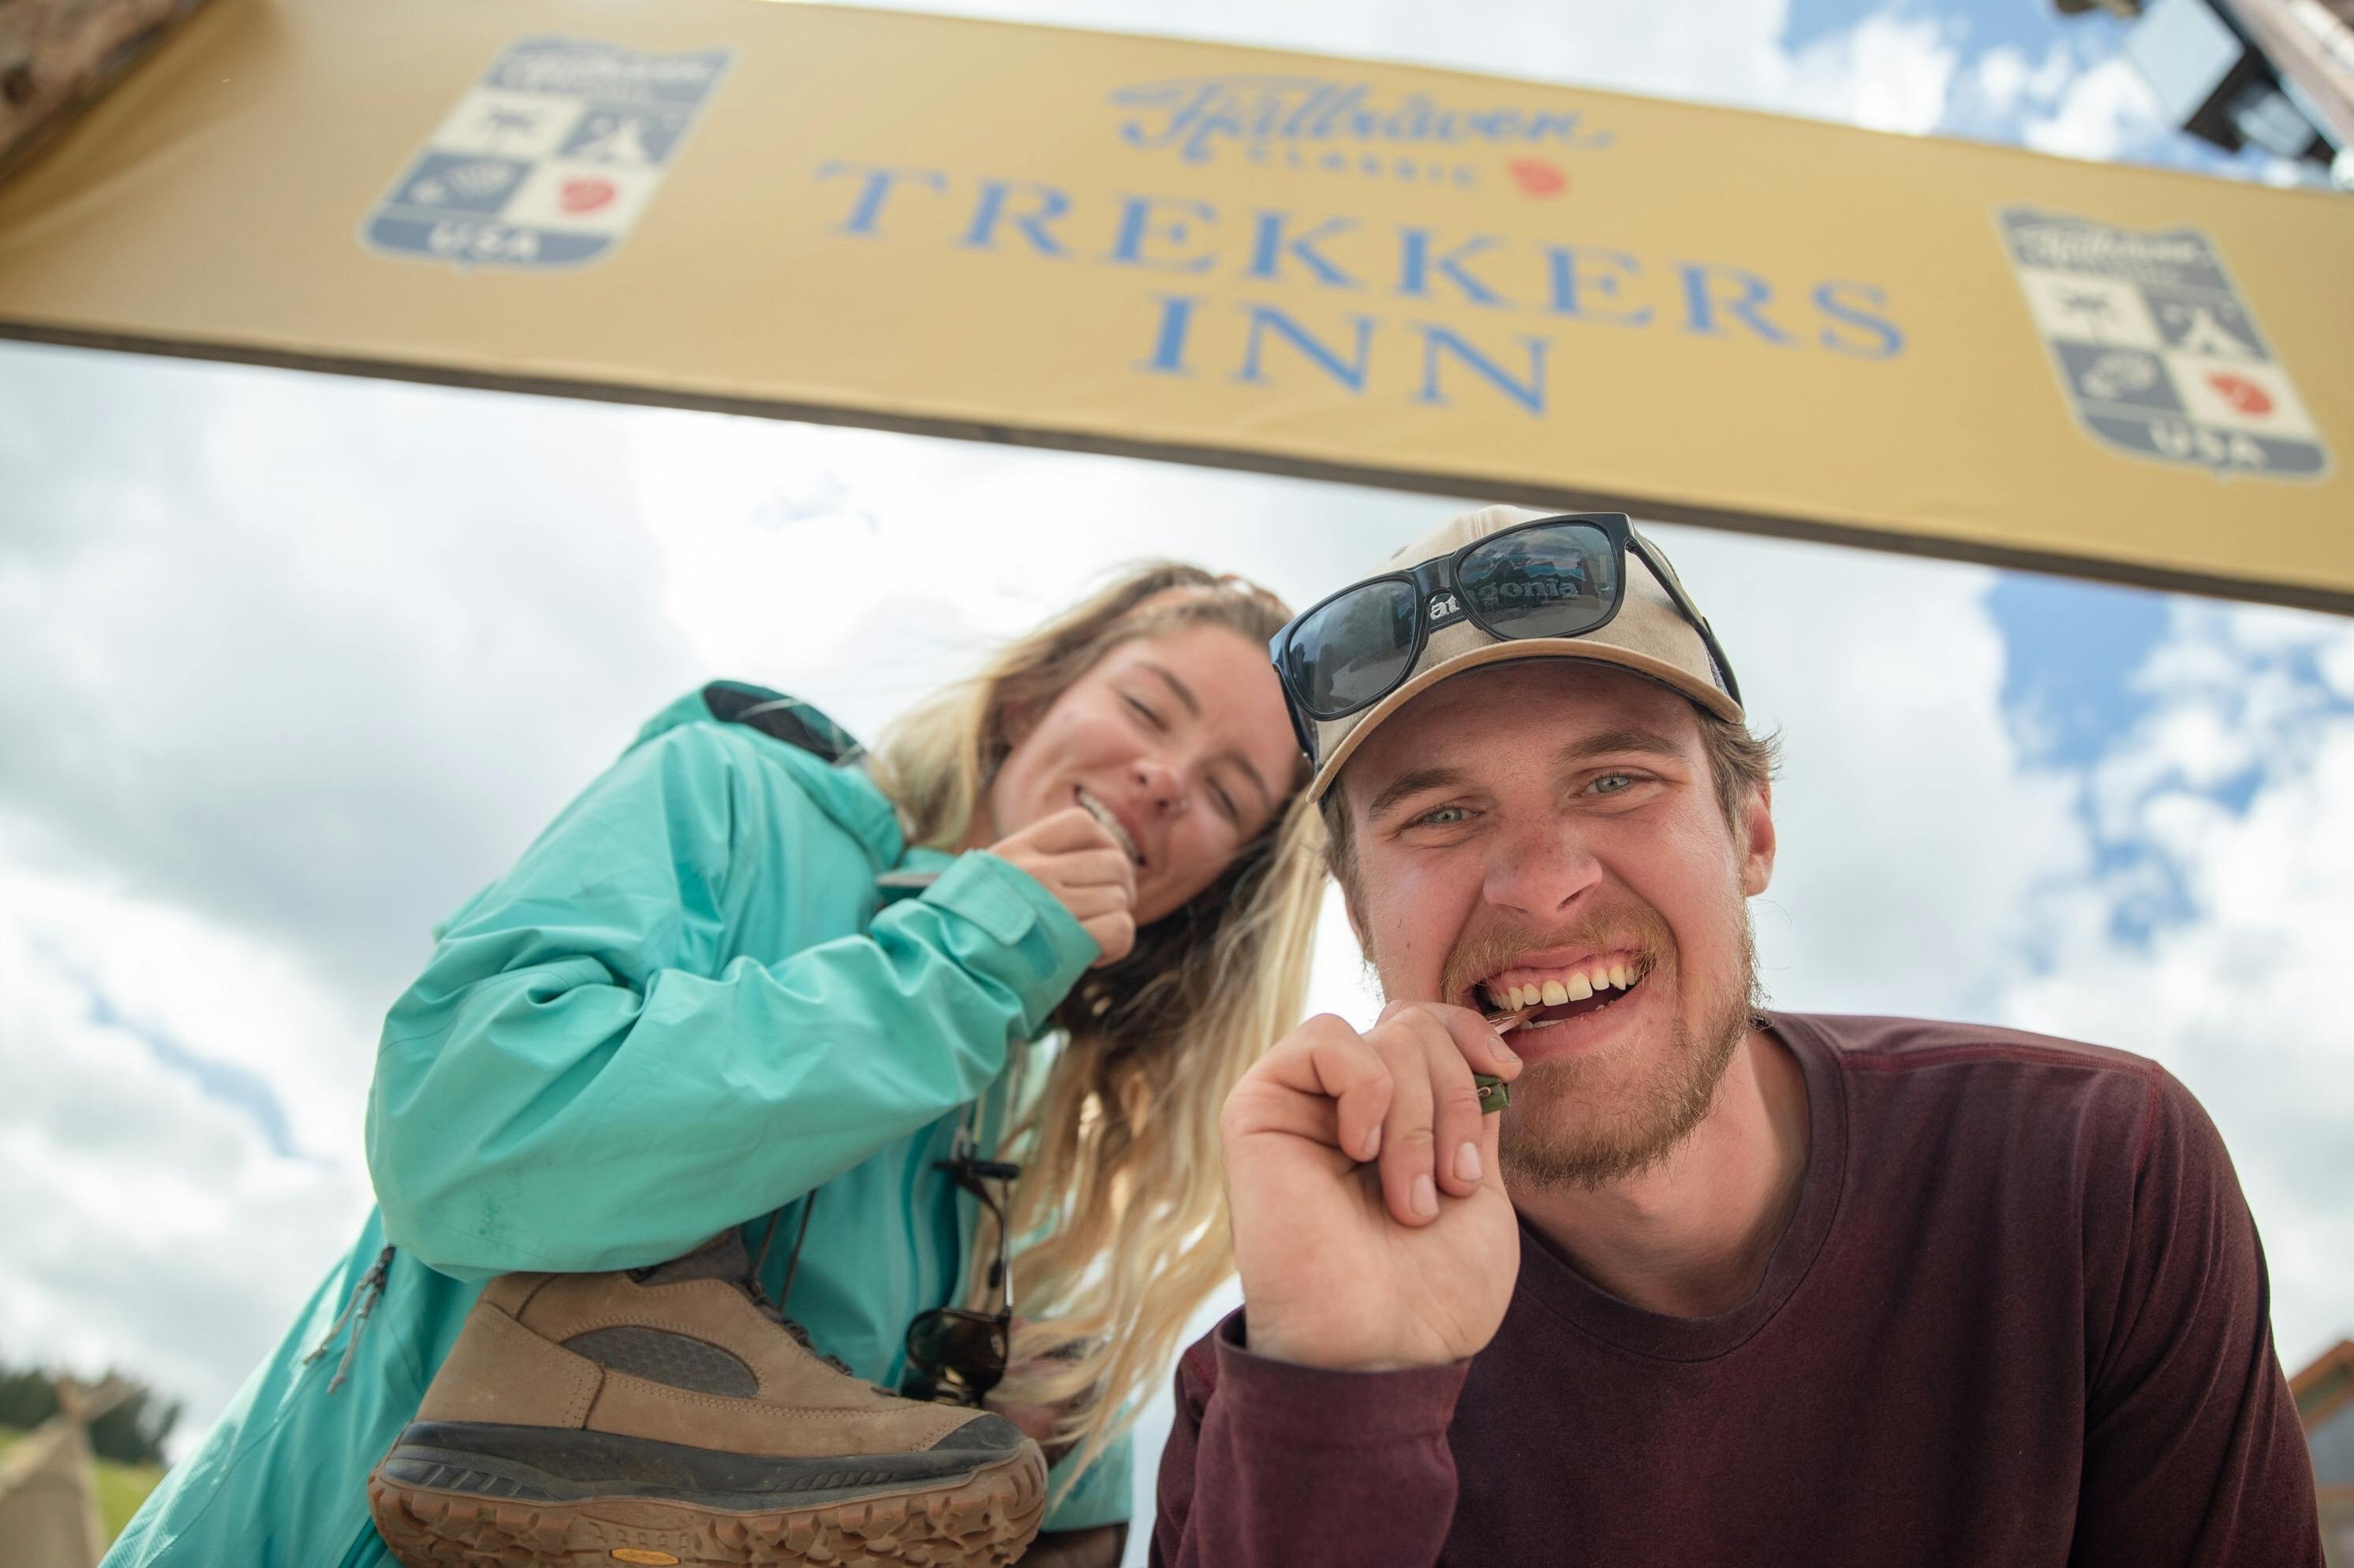 Two people looking at the camera under a sign that reads "trekkers inn".